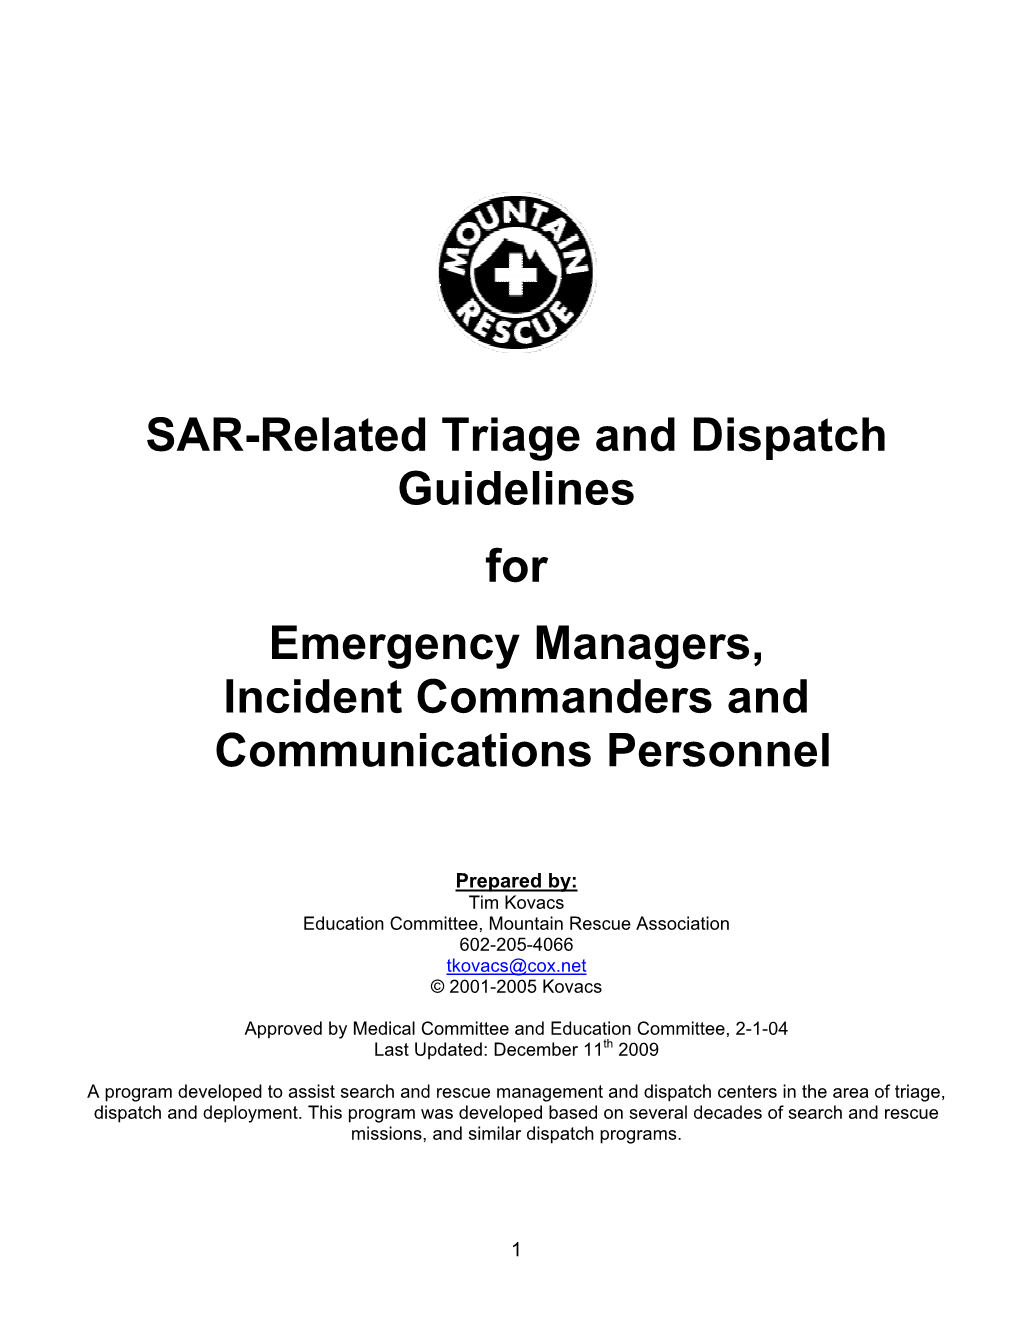 SAR-Related Triage and Dispatch Guidelines for Emergency Managers, Incident Commanders and Communications Personnel